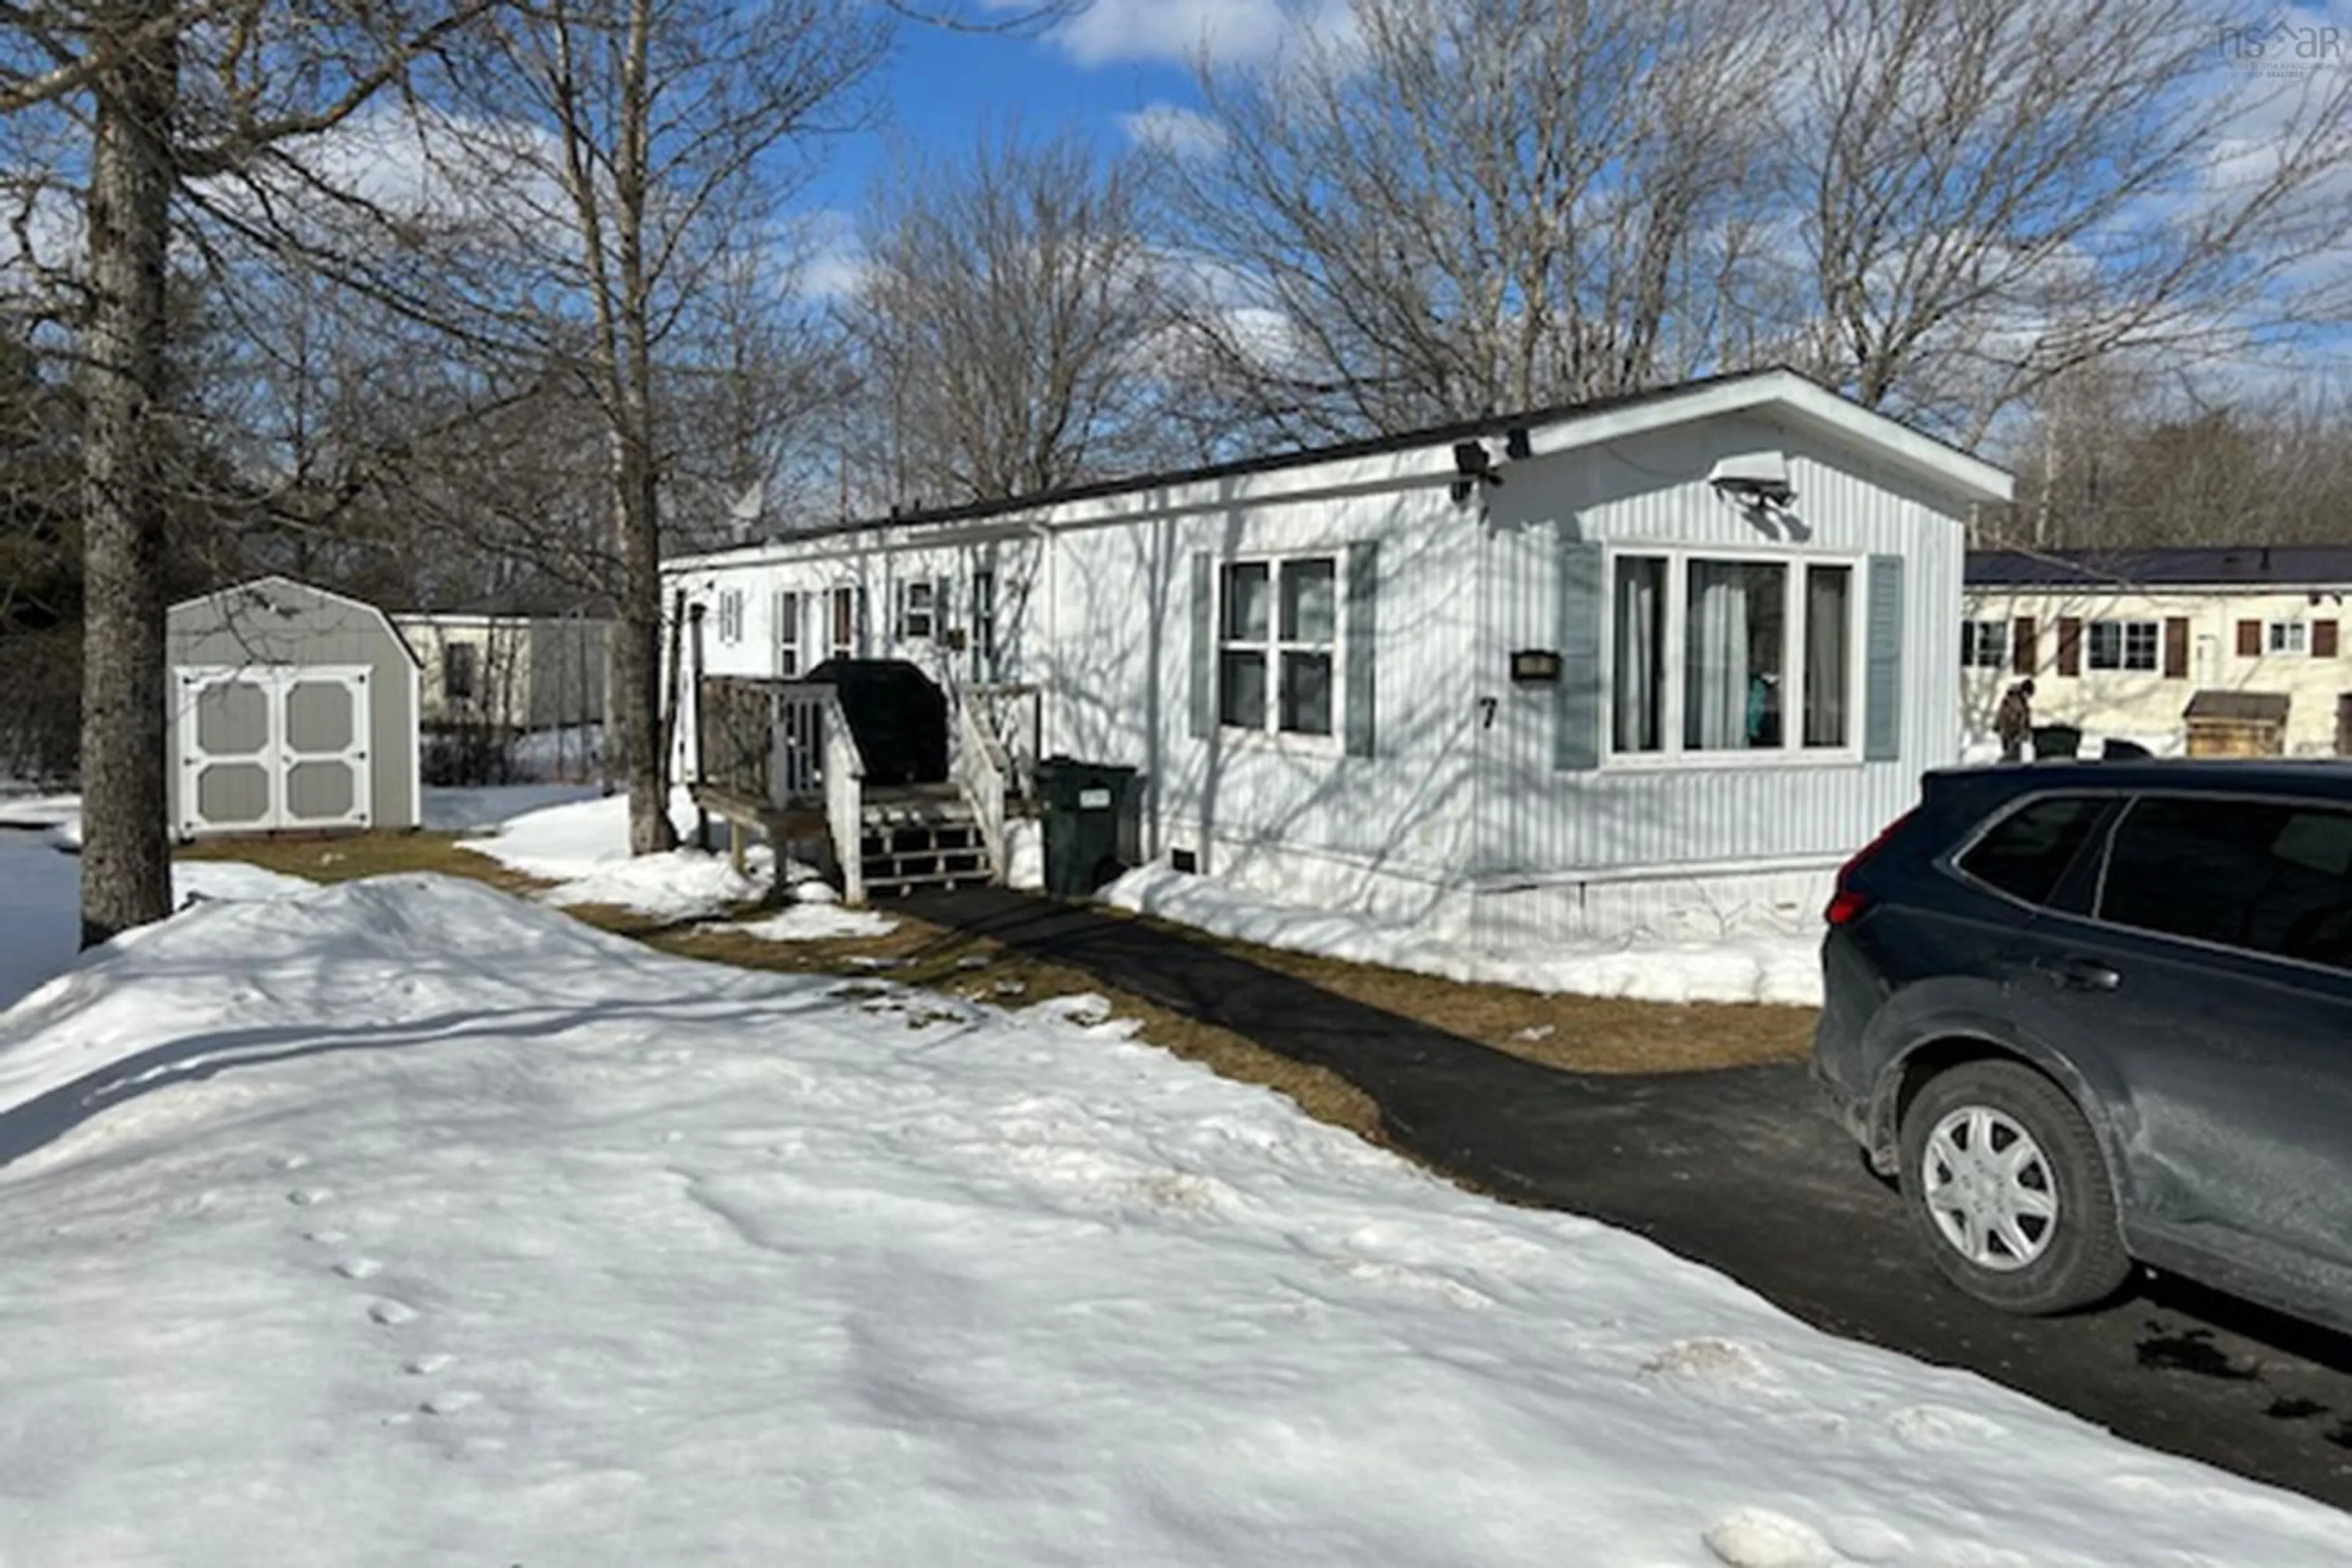 Home with unknown exterior material for 7 Woodlawn Dr, Amherst Nova Scotia B4H 4K5